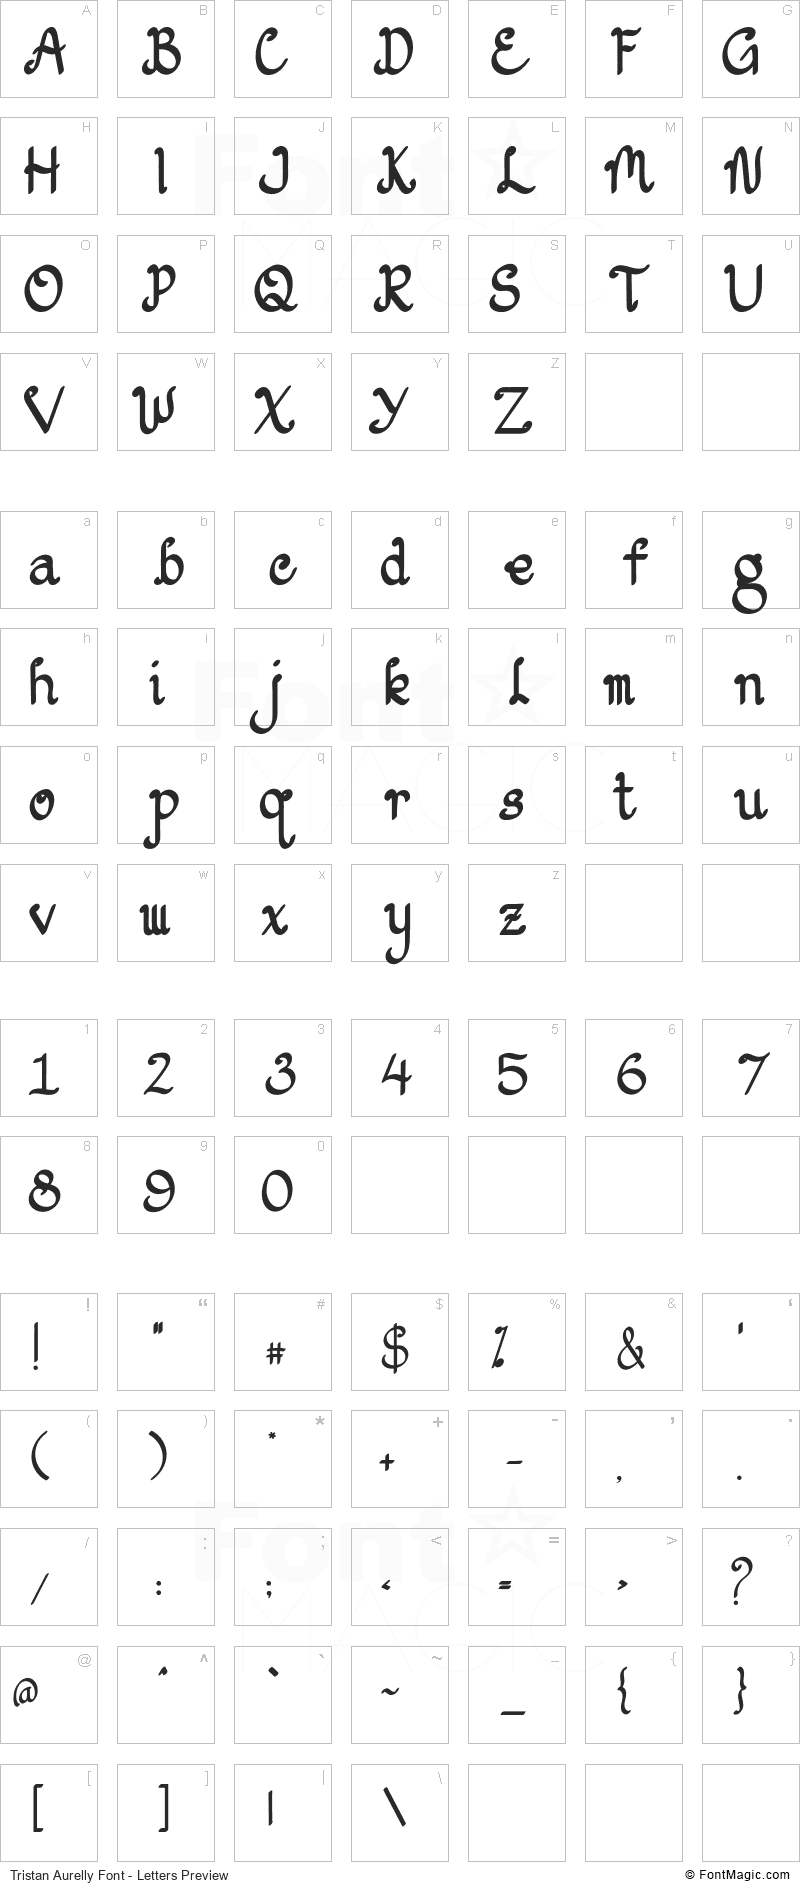 Tristan Aurelly Font - All Latters Preview Chart